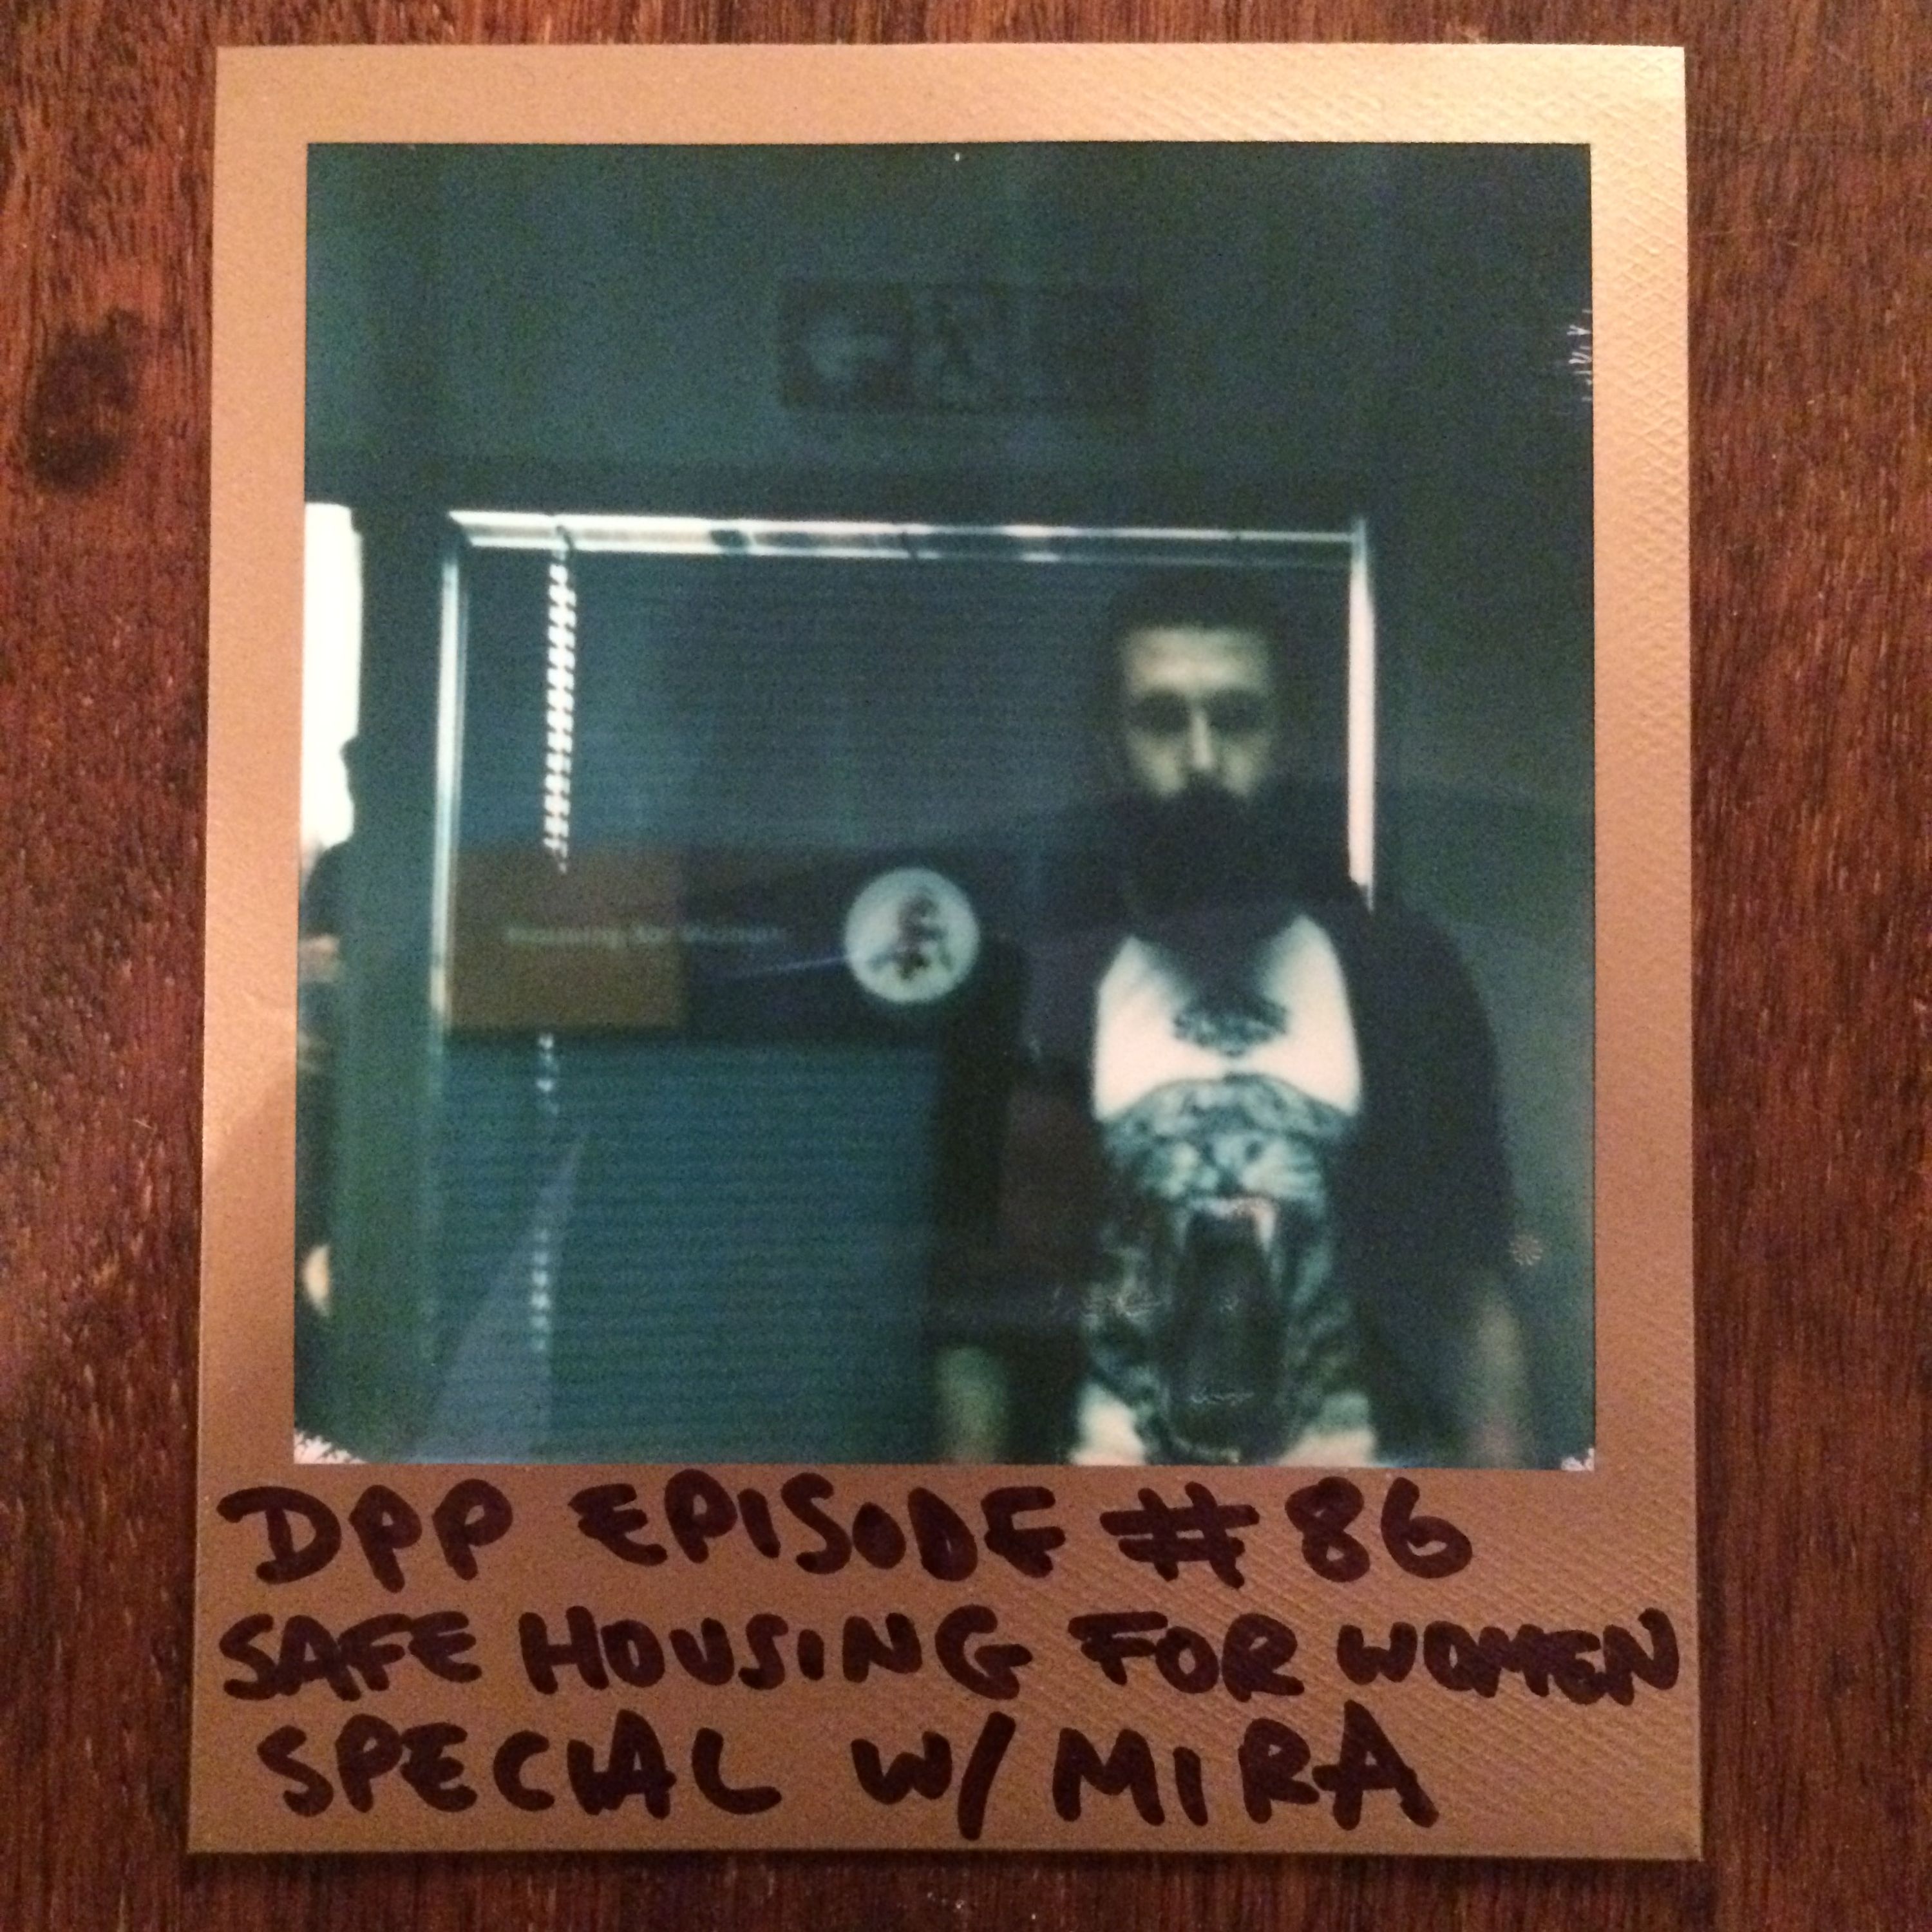 cover art for Housing for Women special - Mira - Distraction Pieces Podcast with Scroobius Pip #86